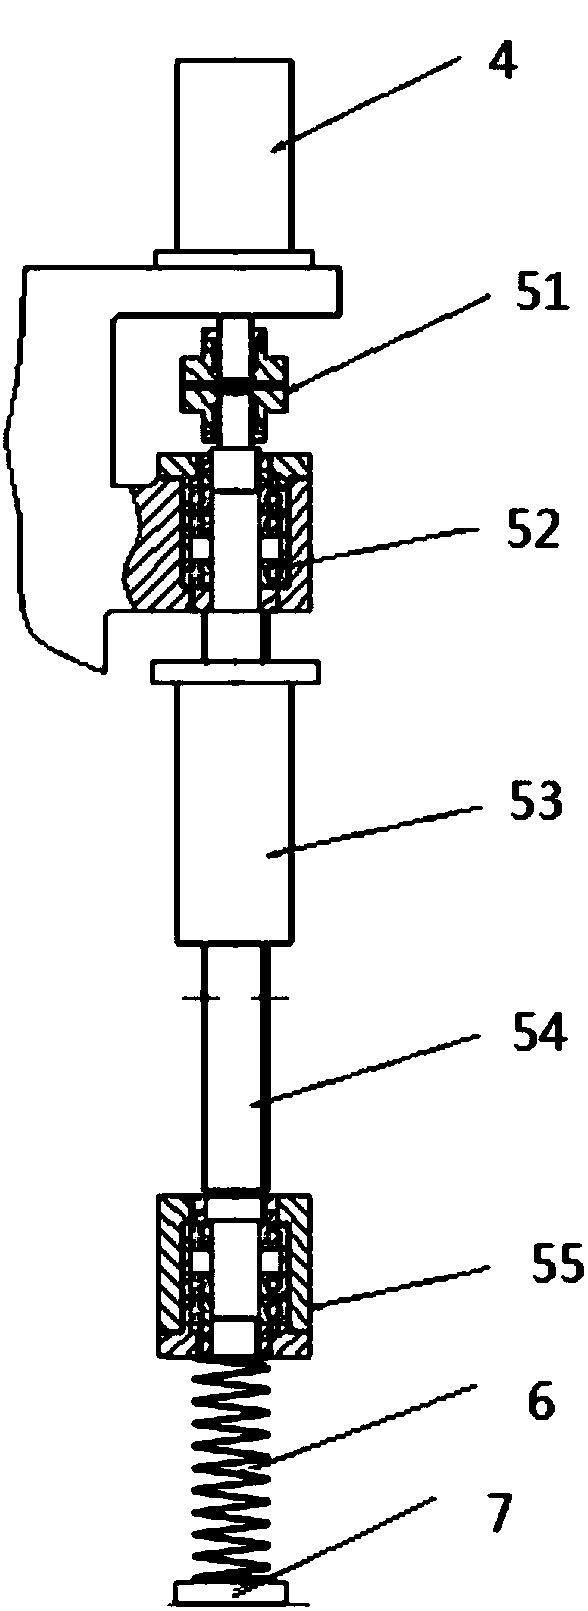 Lead-screw-driving-based radial alternating load loading device for bearing testing machine